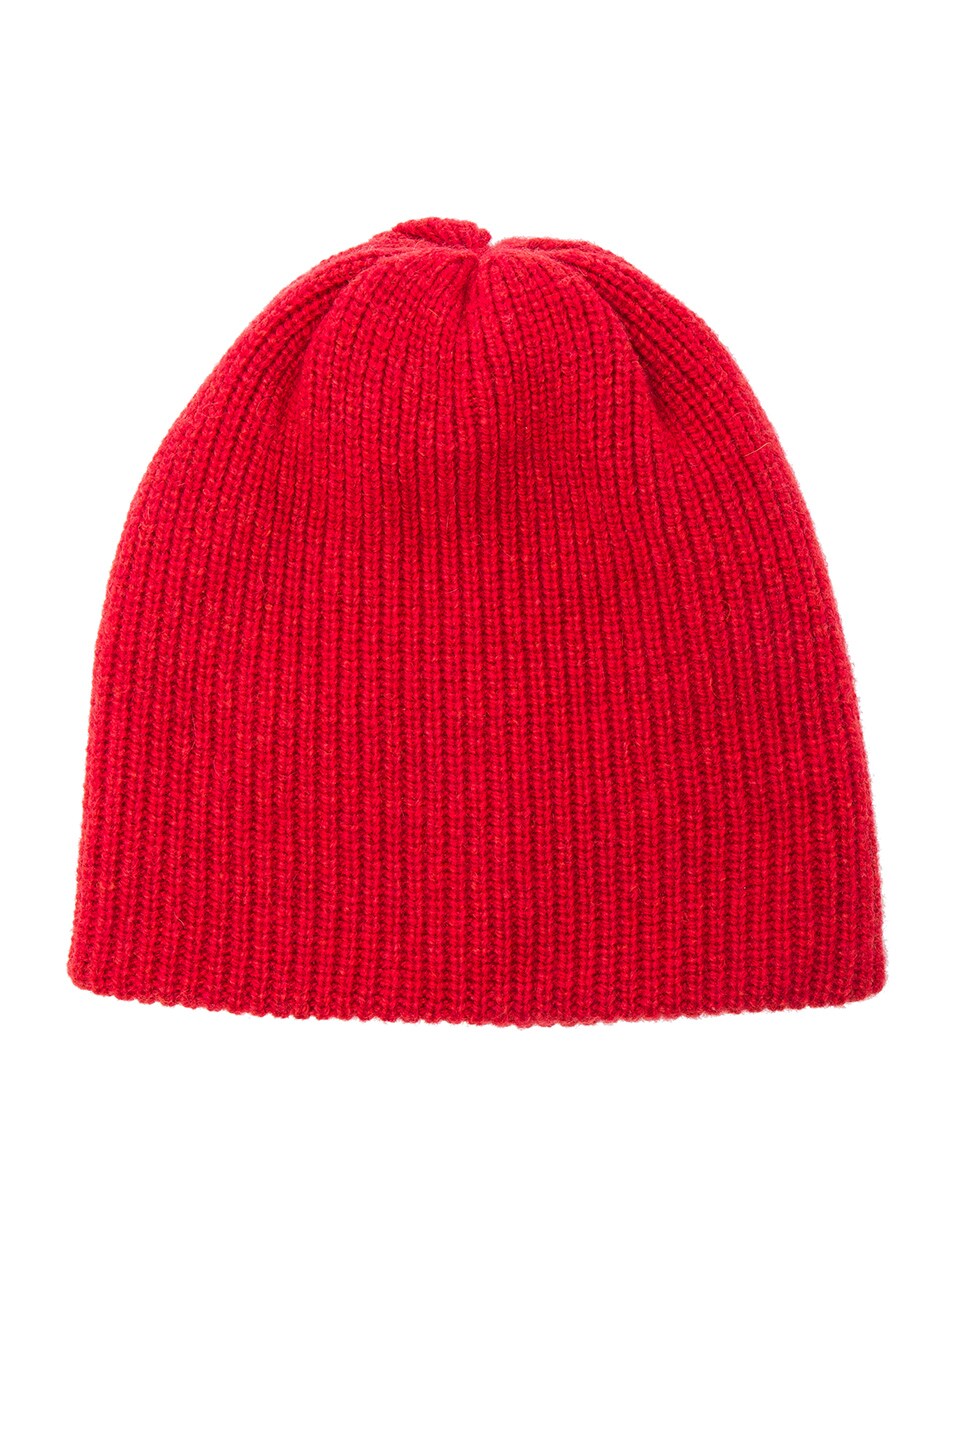 Image 1 of The Elder Statesman for FWRD Watchman's Cap in Red